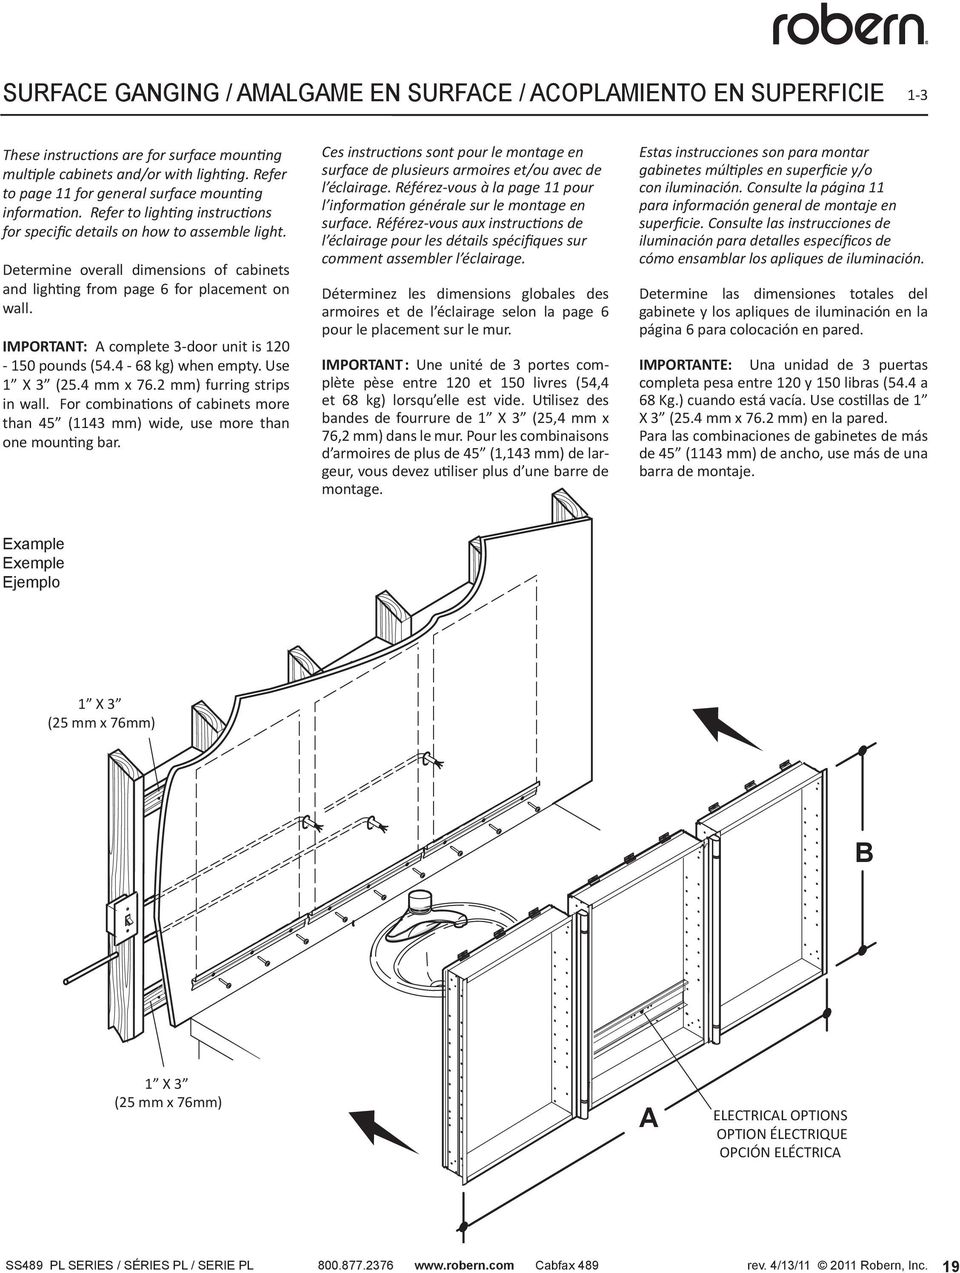 Determine overall dimensions of cabinets and lighting from page 6 for placement on wall. IMPORTANT: A complete 3-door unit is 120-150 pounds (54.4-68 kg) when empty. Use 1 X 3 (25.4 mm x 76.